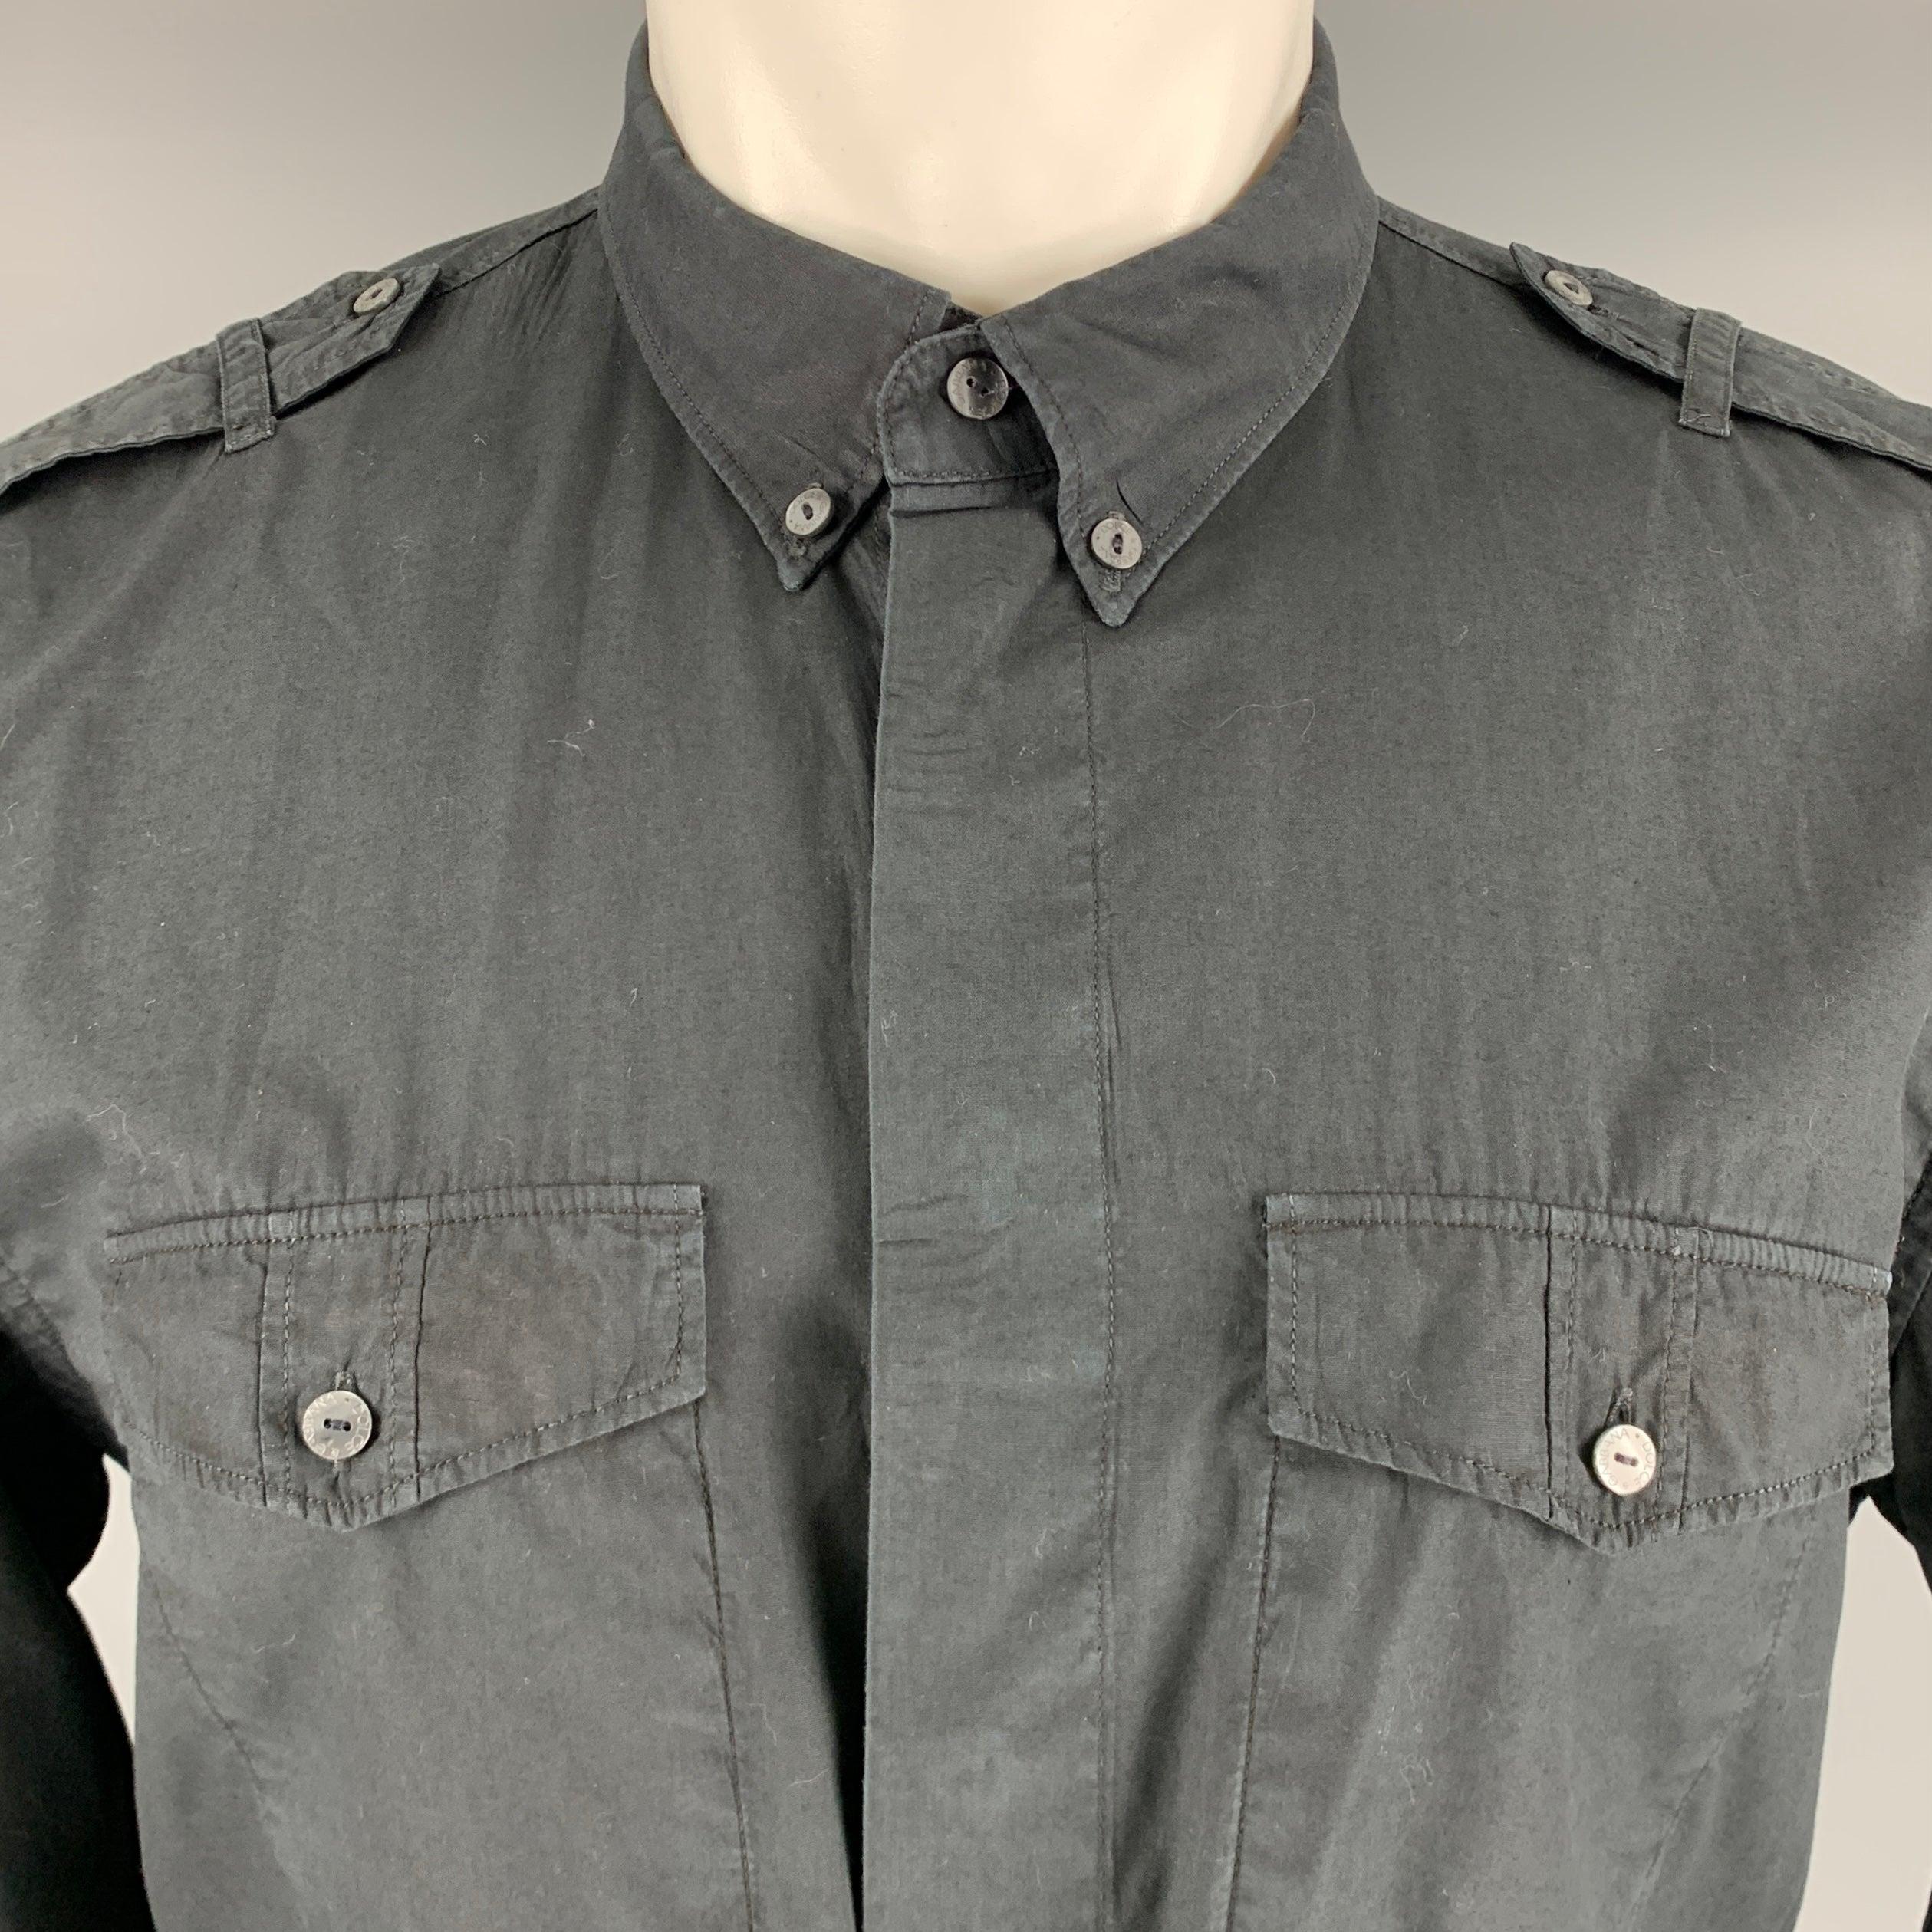 DOLCE & GABBANA long sleeve shirt
in a black cotton woven fabric featuring epaulettes, two button pockets, a button down collar, and button closure. Made in Italy.Very Good Pre-Owned Condition. Some light fading. One of the tabs for roll tab sleeves